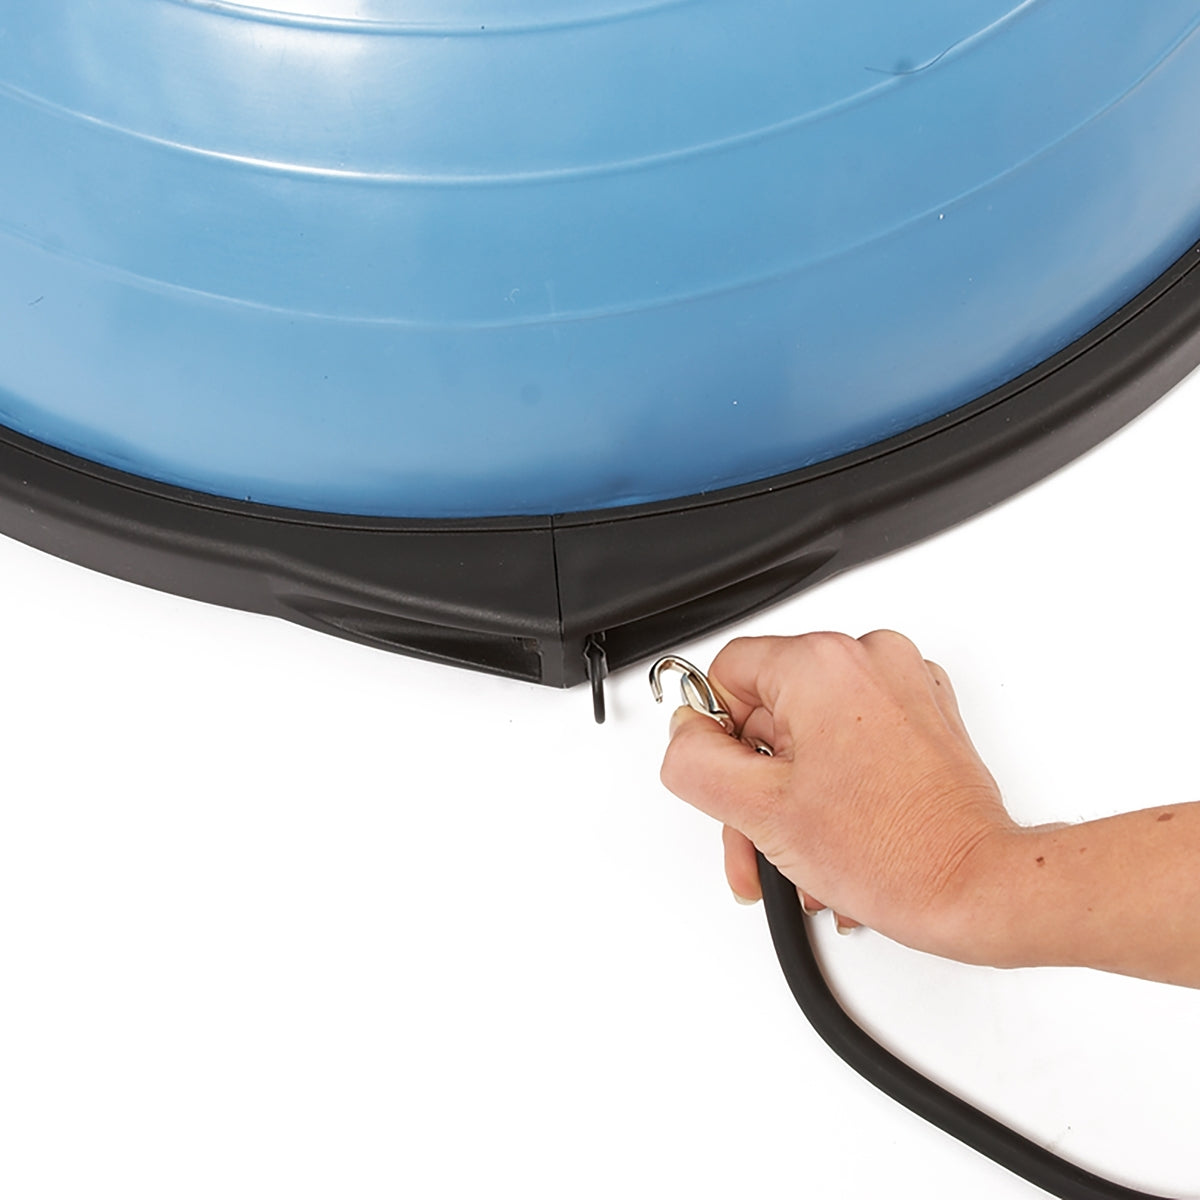 BOSU® Balance Trainer with Resistance Bands